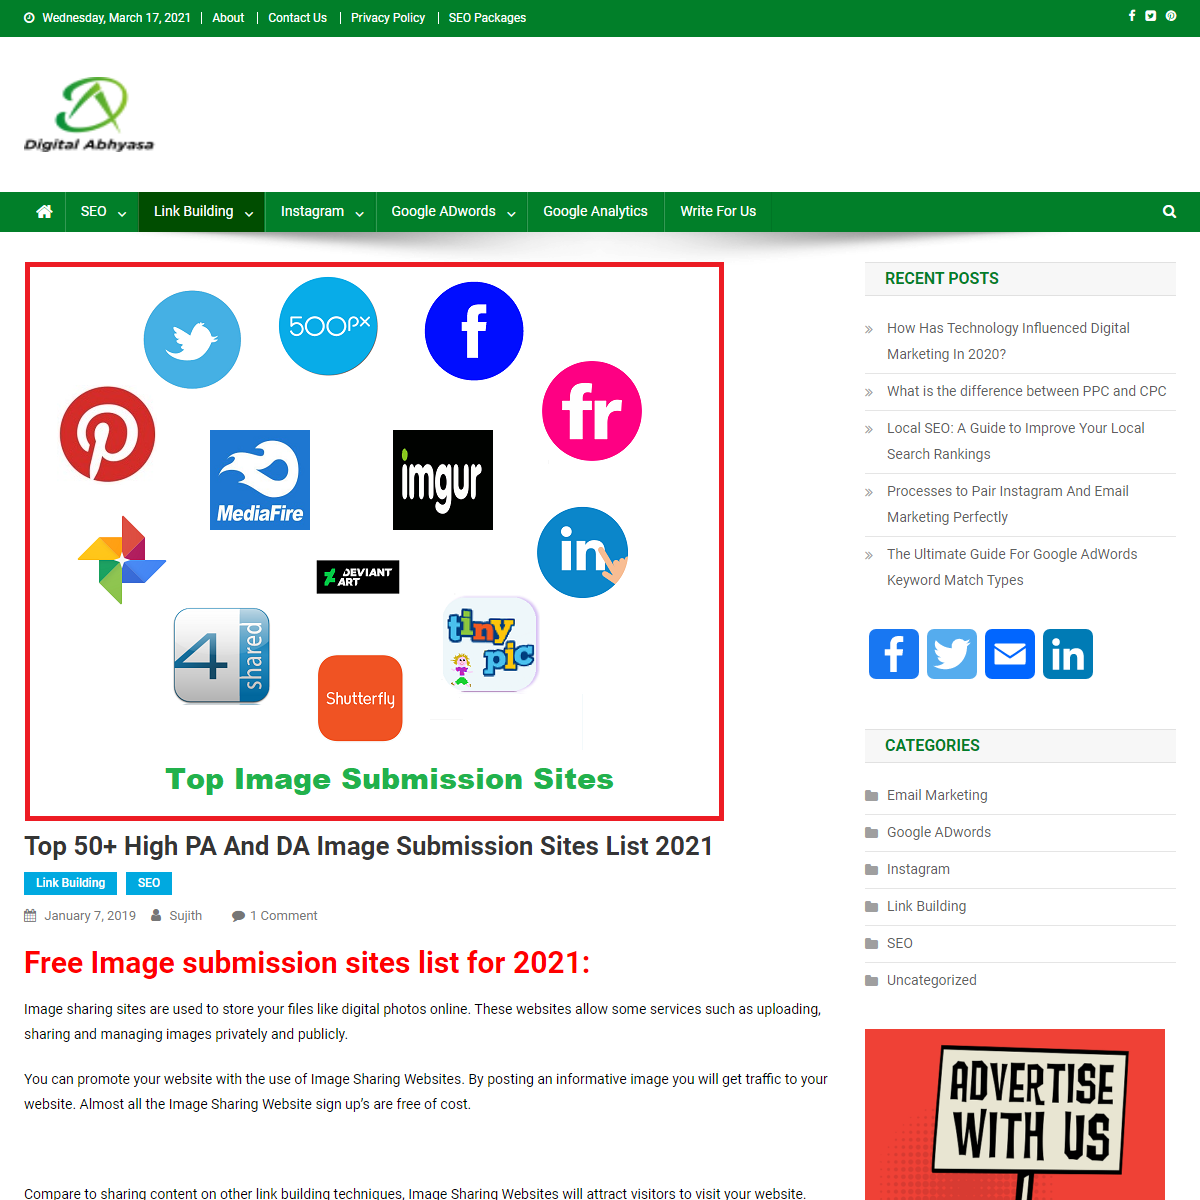 A complete backup of http://www.digitalabhyasa.com/image-submission-sites-list/